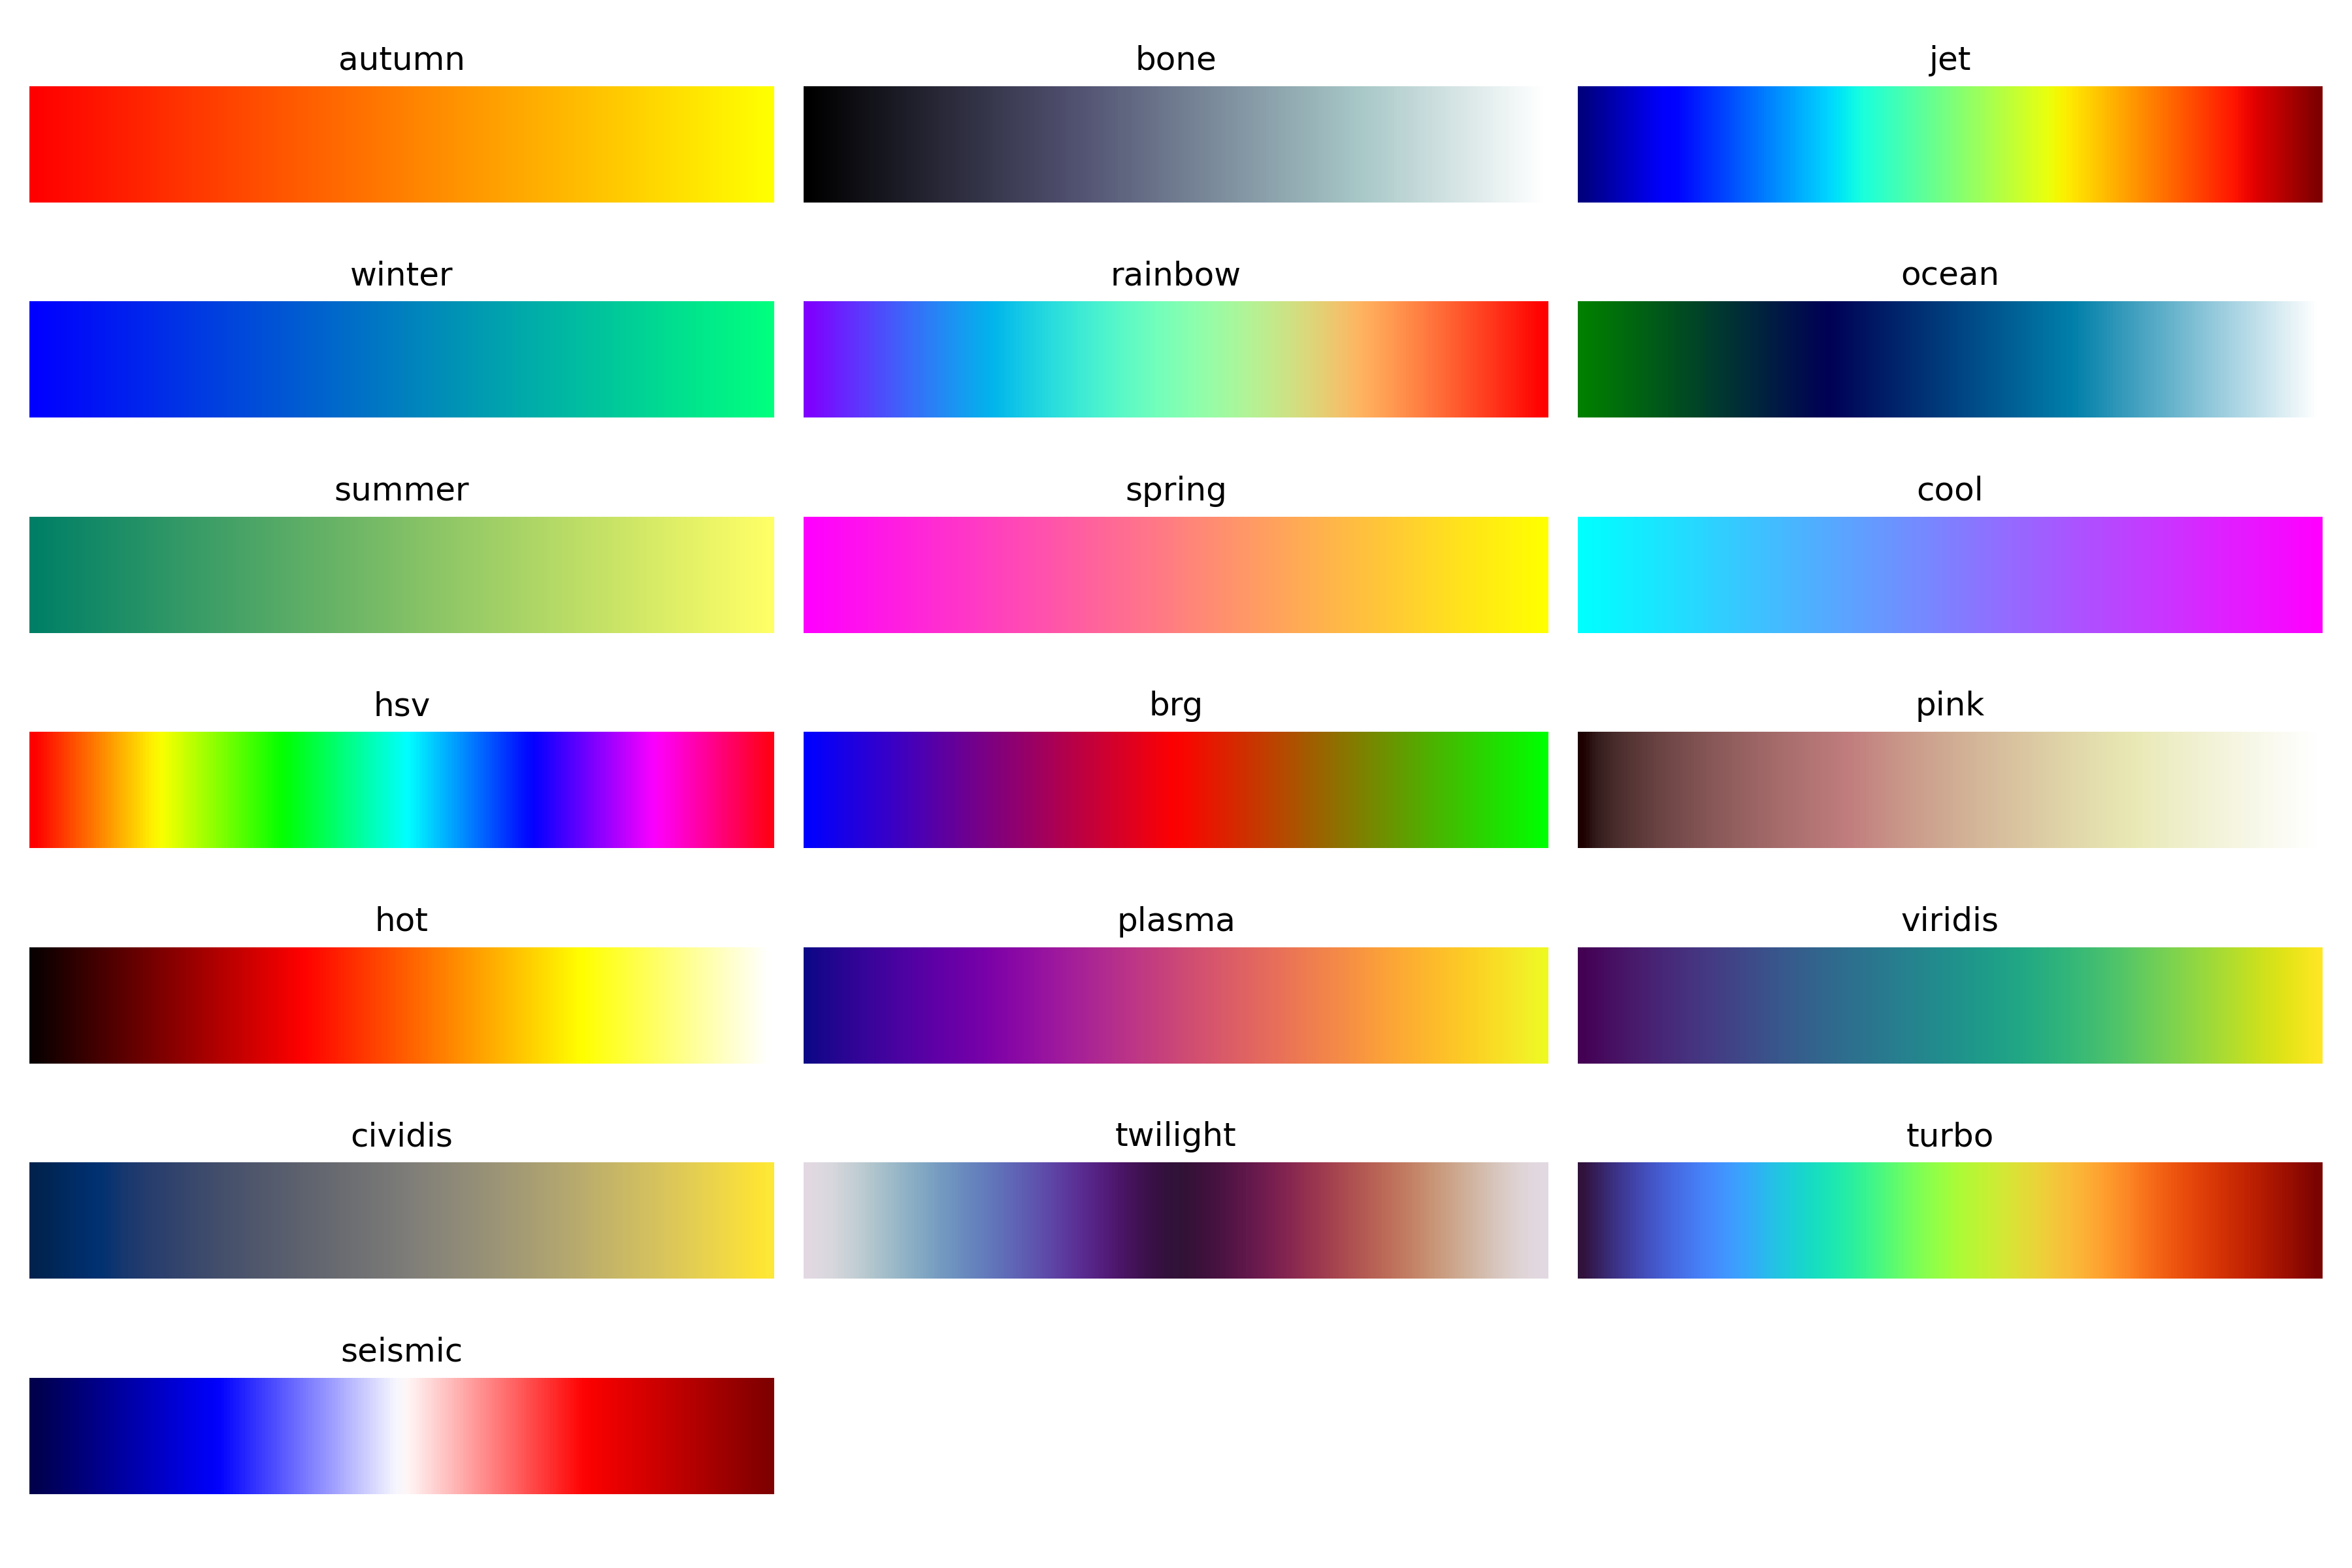 _images/ColorMapType.png